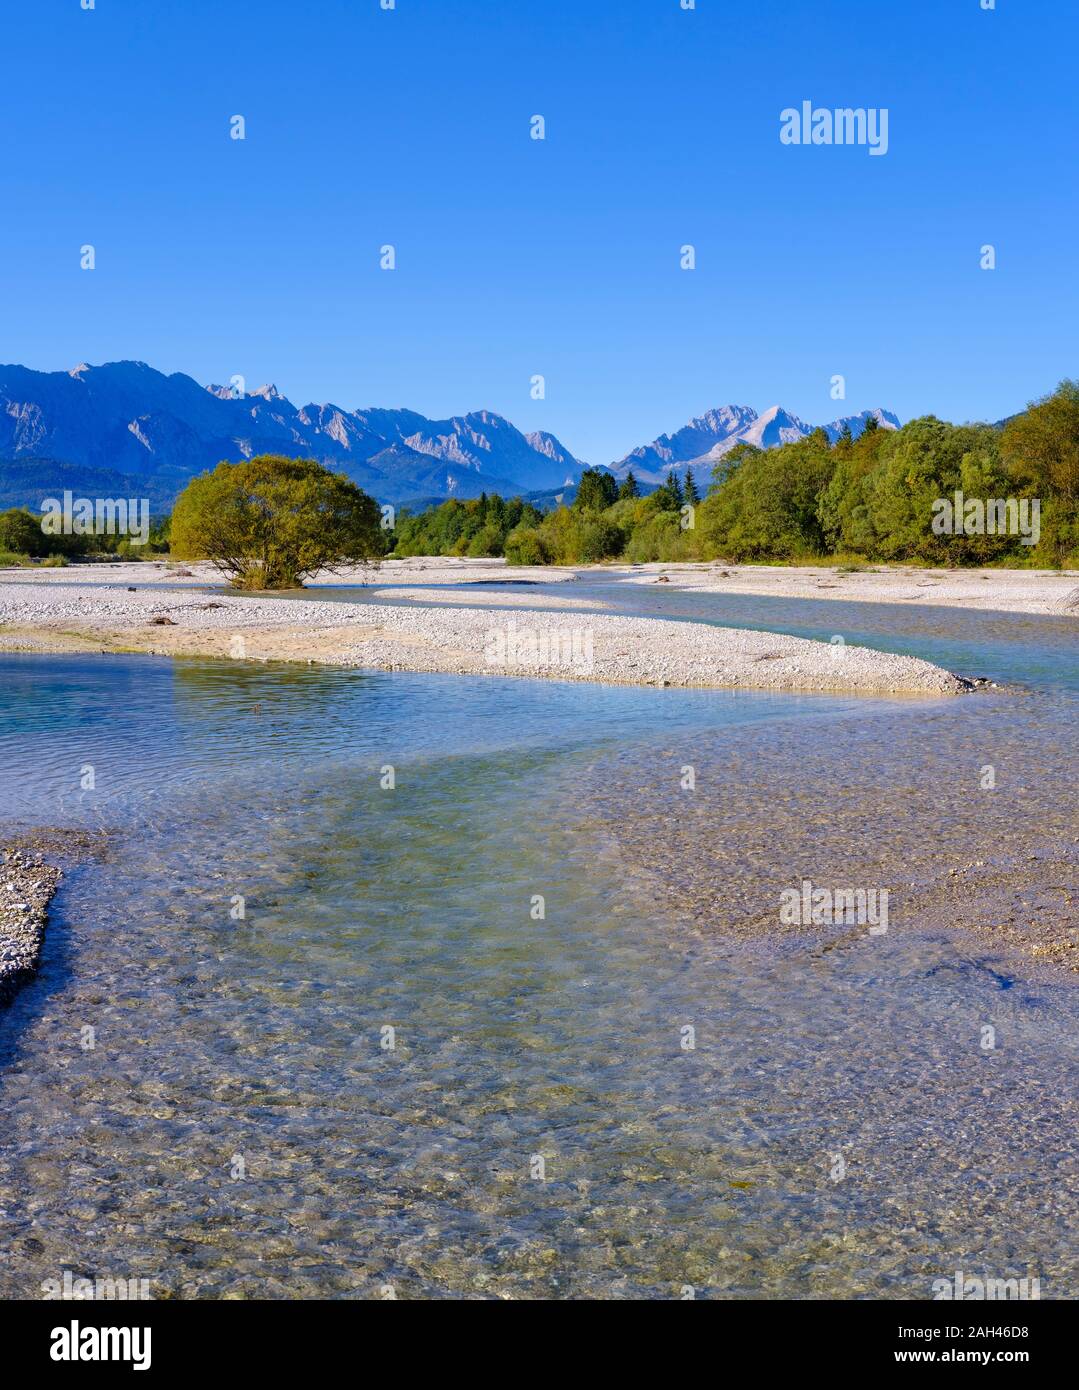 Germany, Bavaria, Wallgau, Scenic view of Isar river with Wetterstein Mountains looming in background Stock Photo